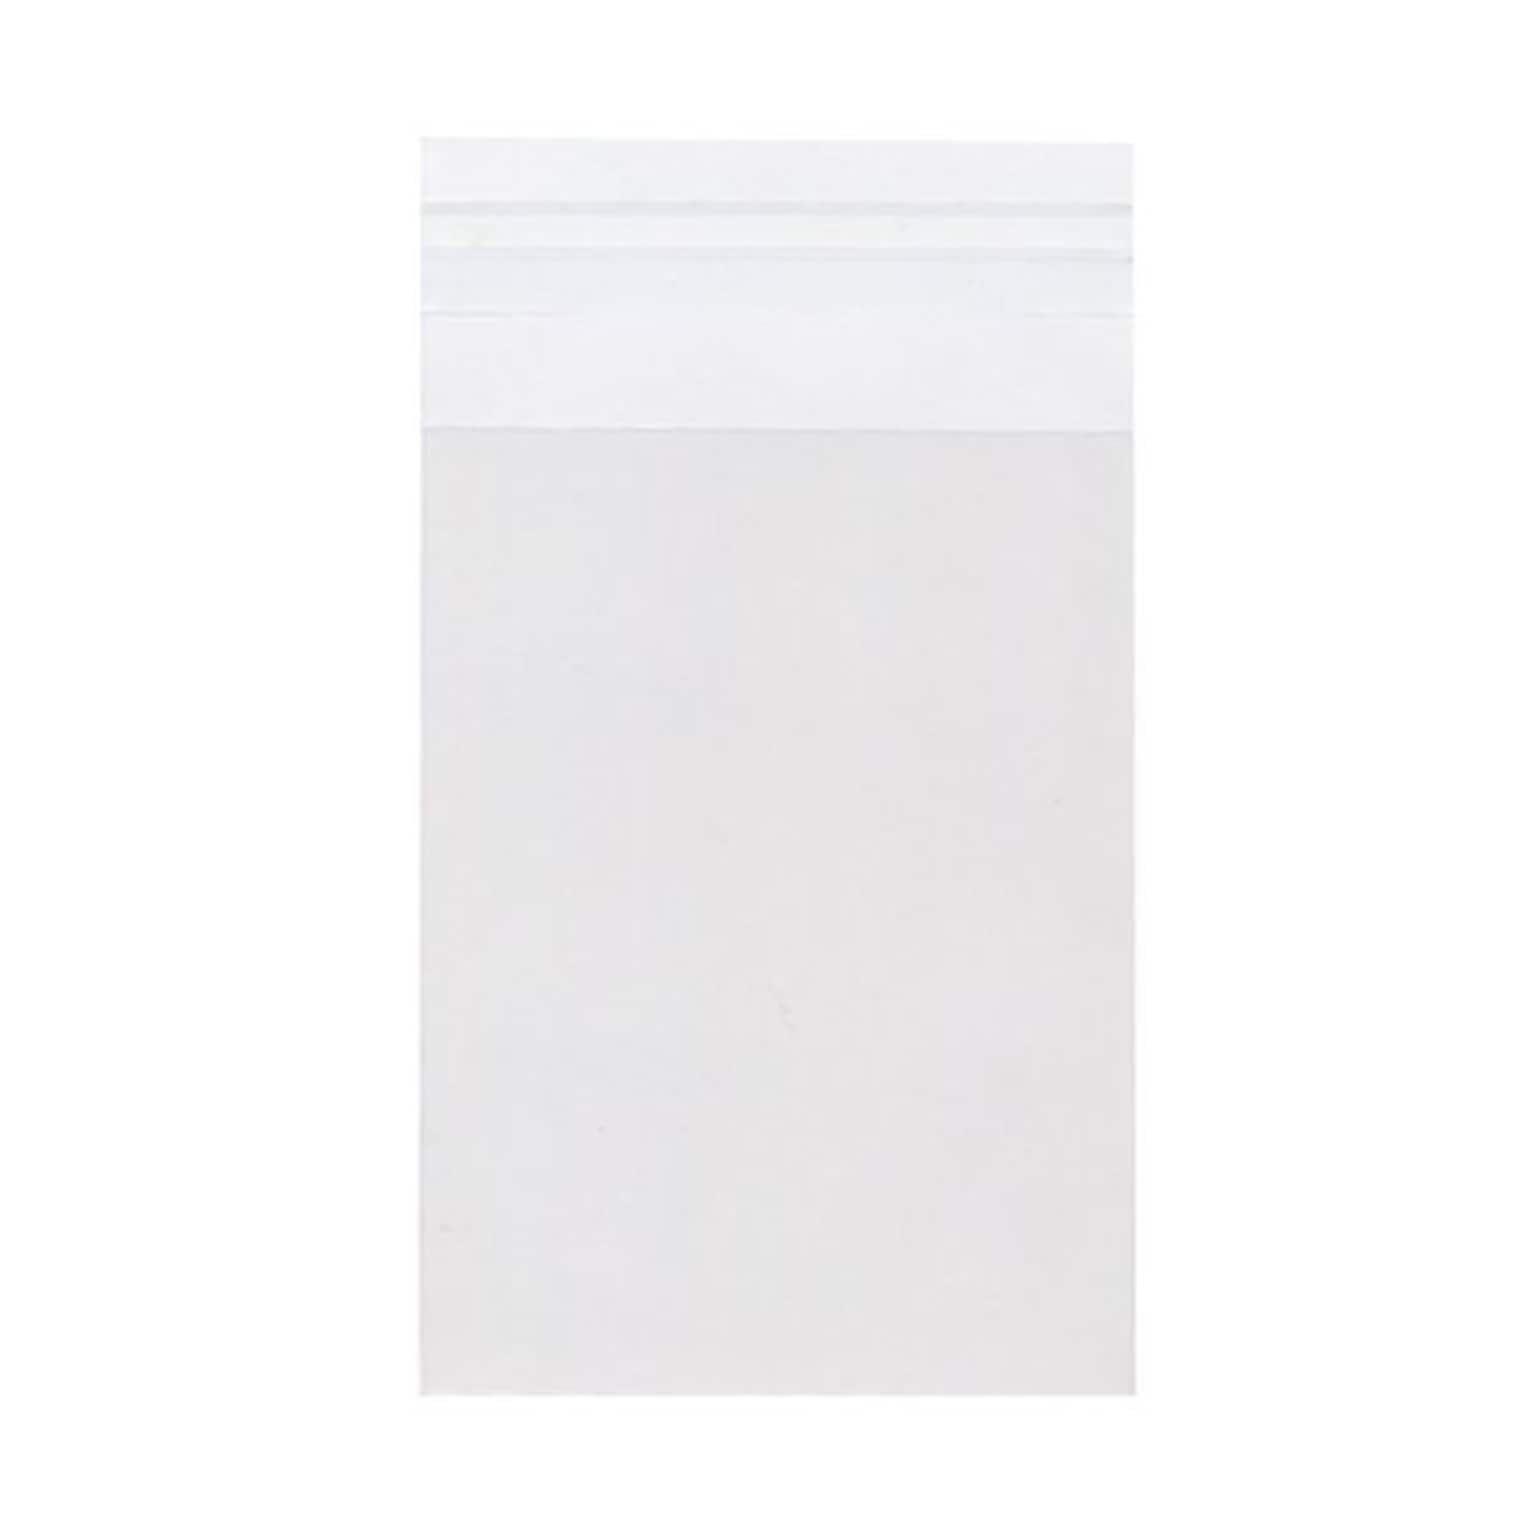 JAM Paper Cello Sleeves with Peel & Seal Closure, 4Bar A1, 3.8125 x 5.1875, Clear, 100/Pack (4BARCELLO)